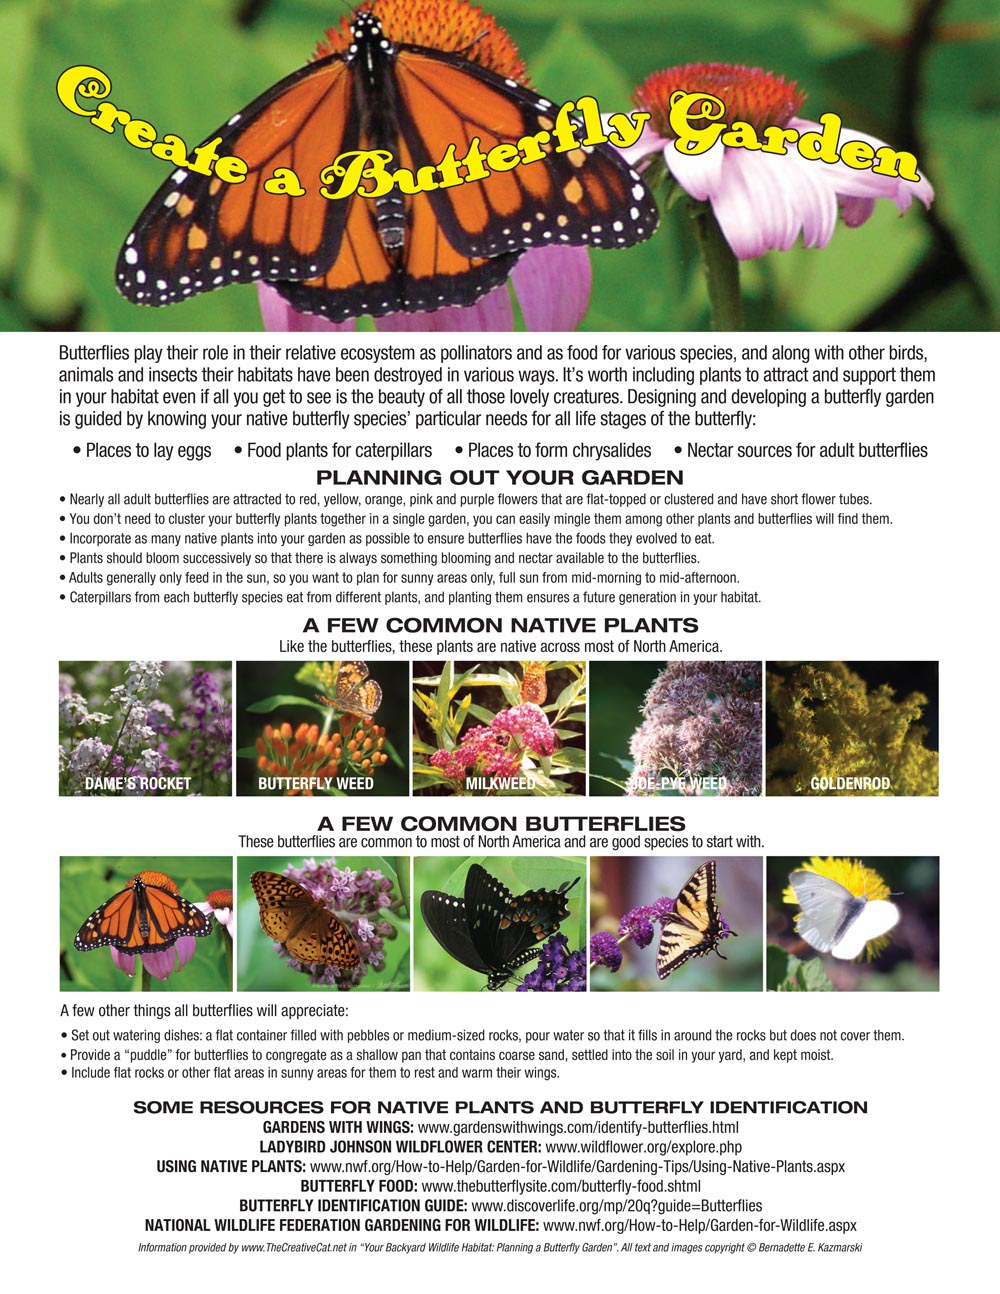 Planning Your Butterfly Garden